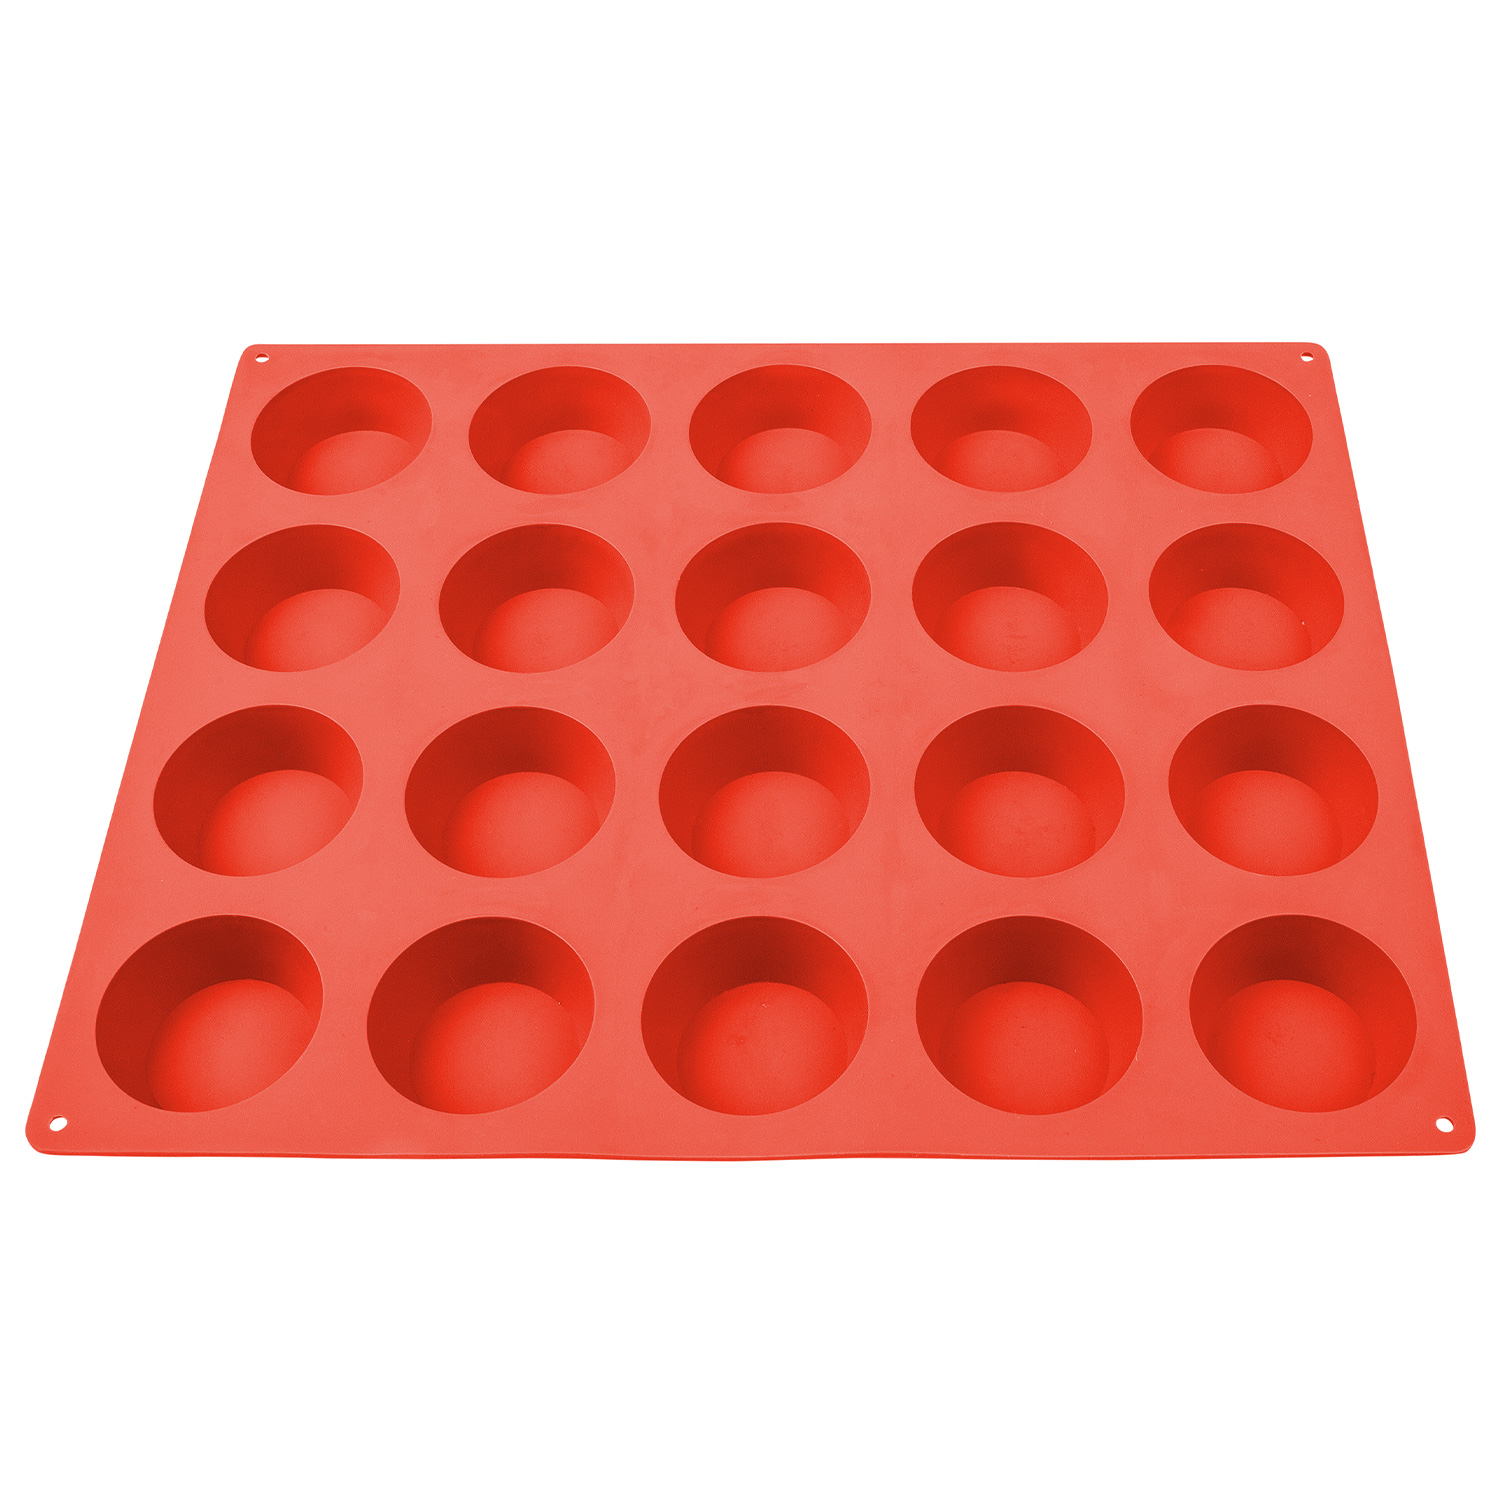 Square Hand Made Silicone Baking Molds Review 